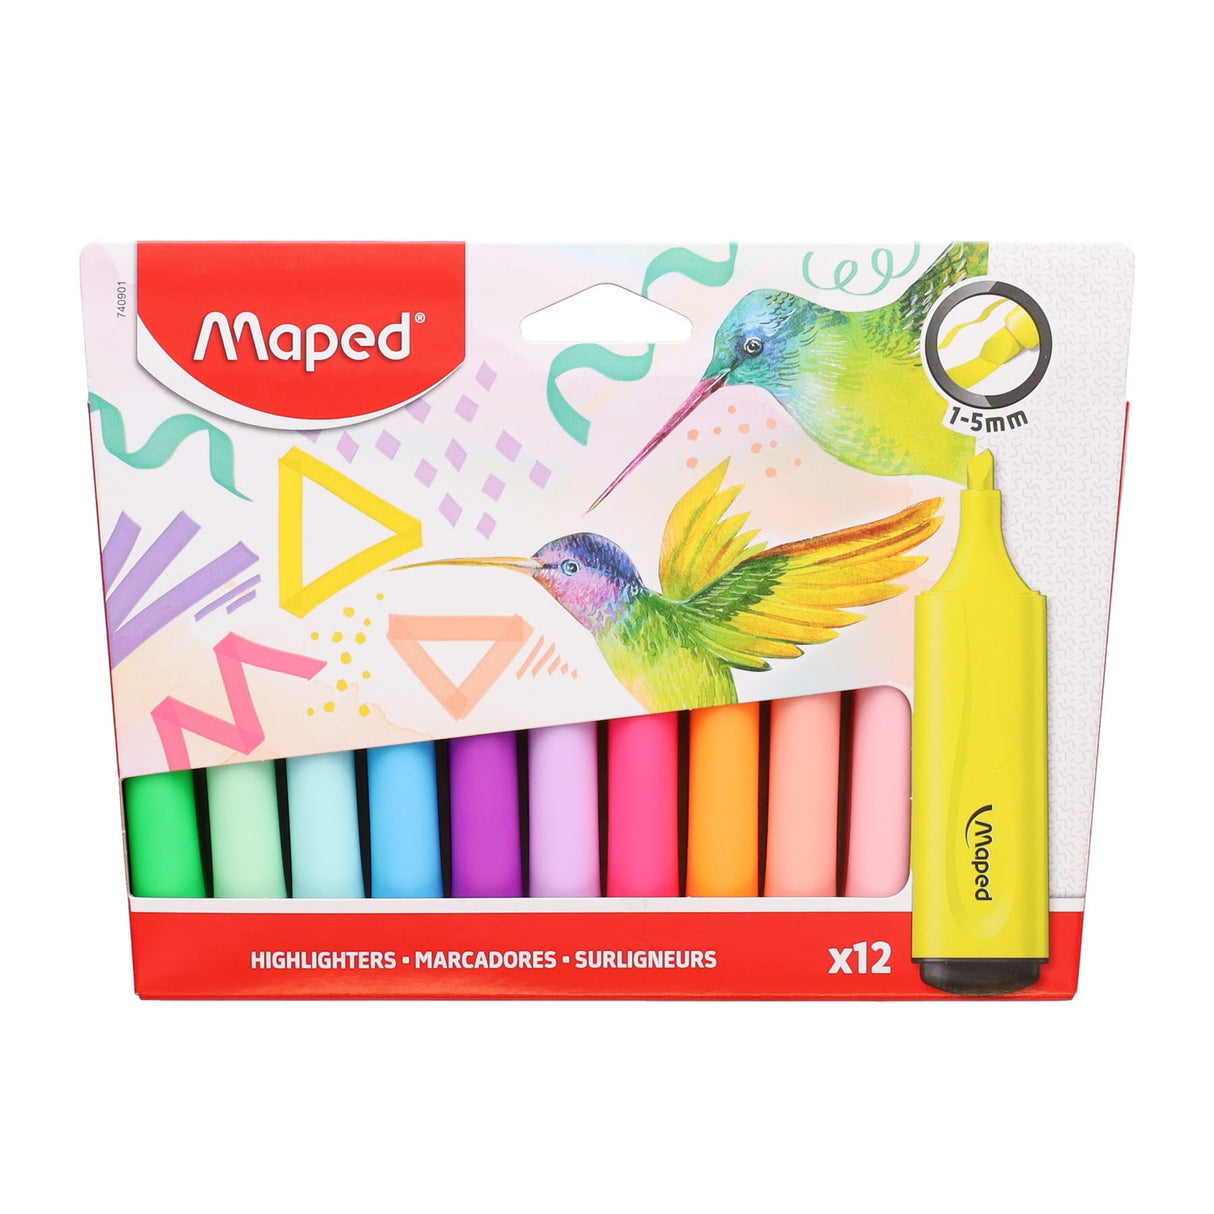 Maped Highlighters - Pack of 12 | Stationery Shop UK